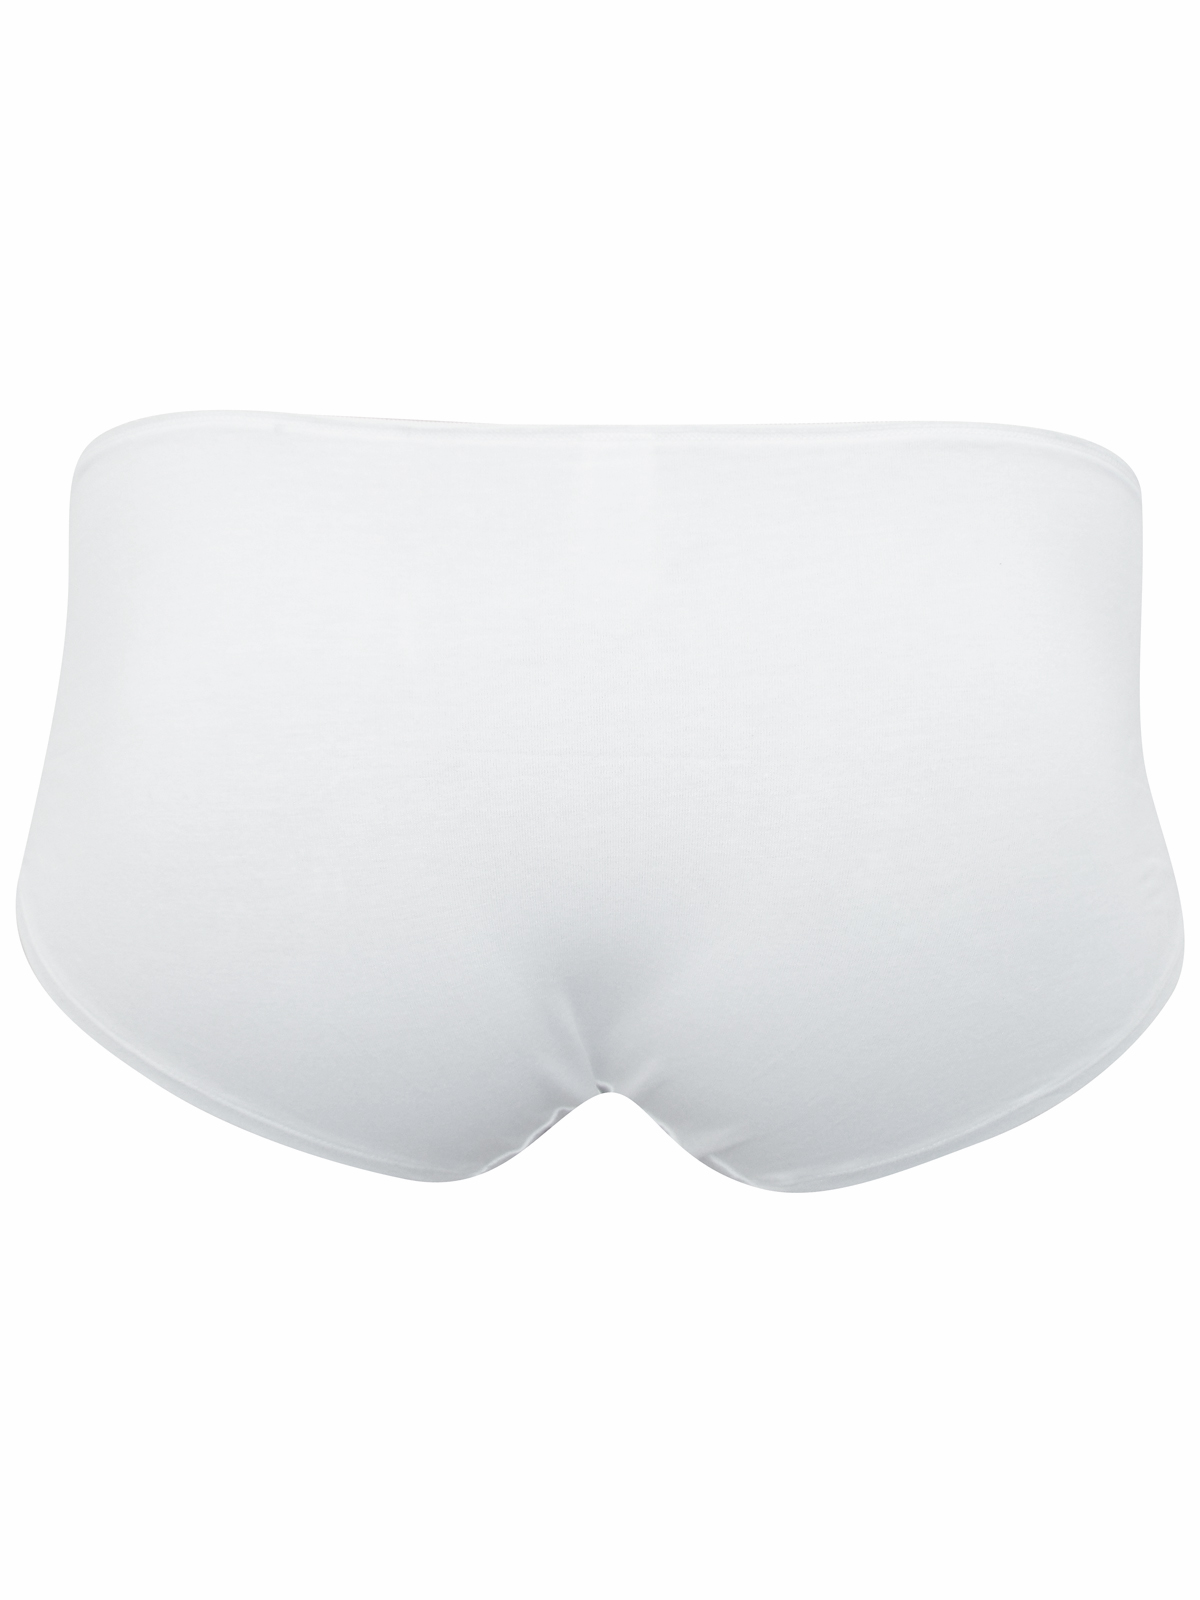 George - - G3ORGE WHITE 4-Pack Cotton Lycra Low Rise Shorts - Size 16 to 18